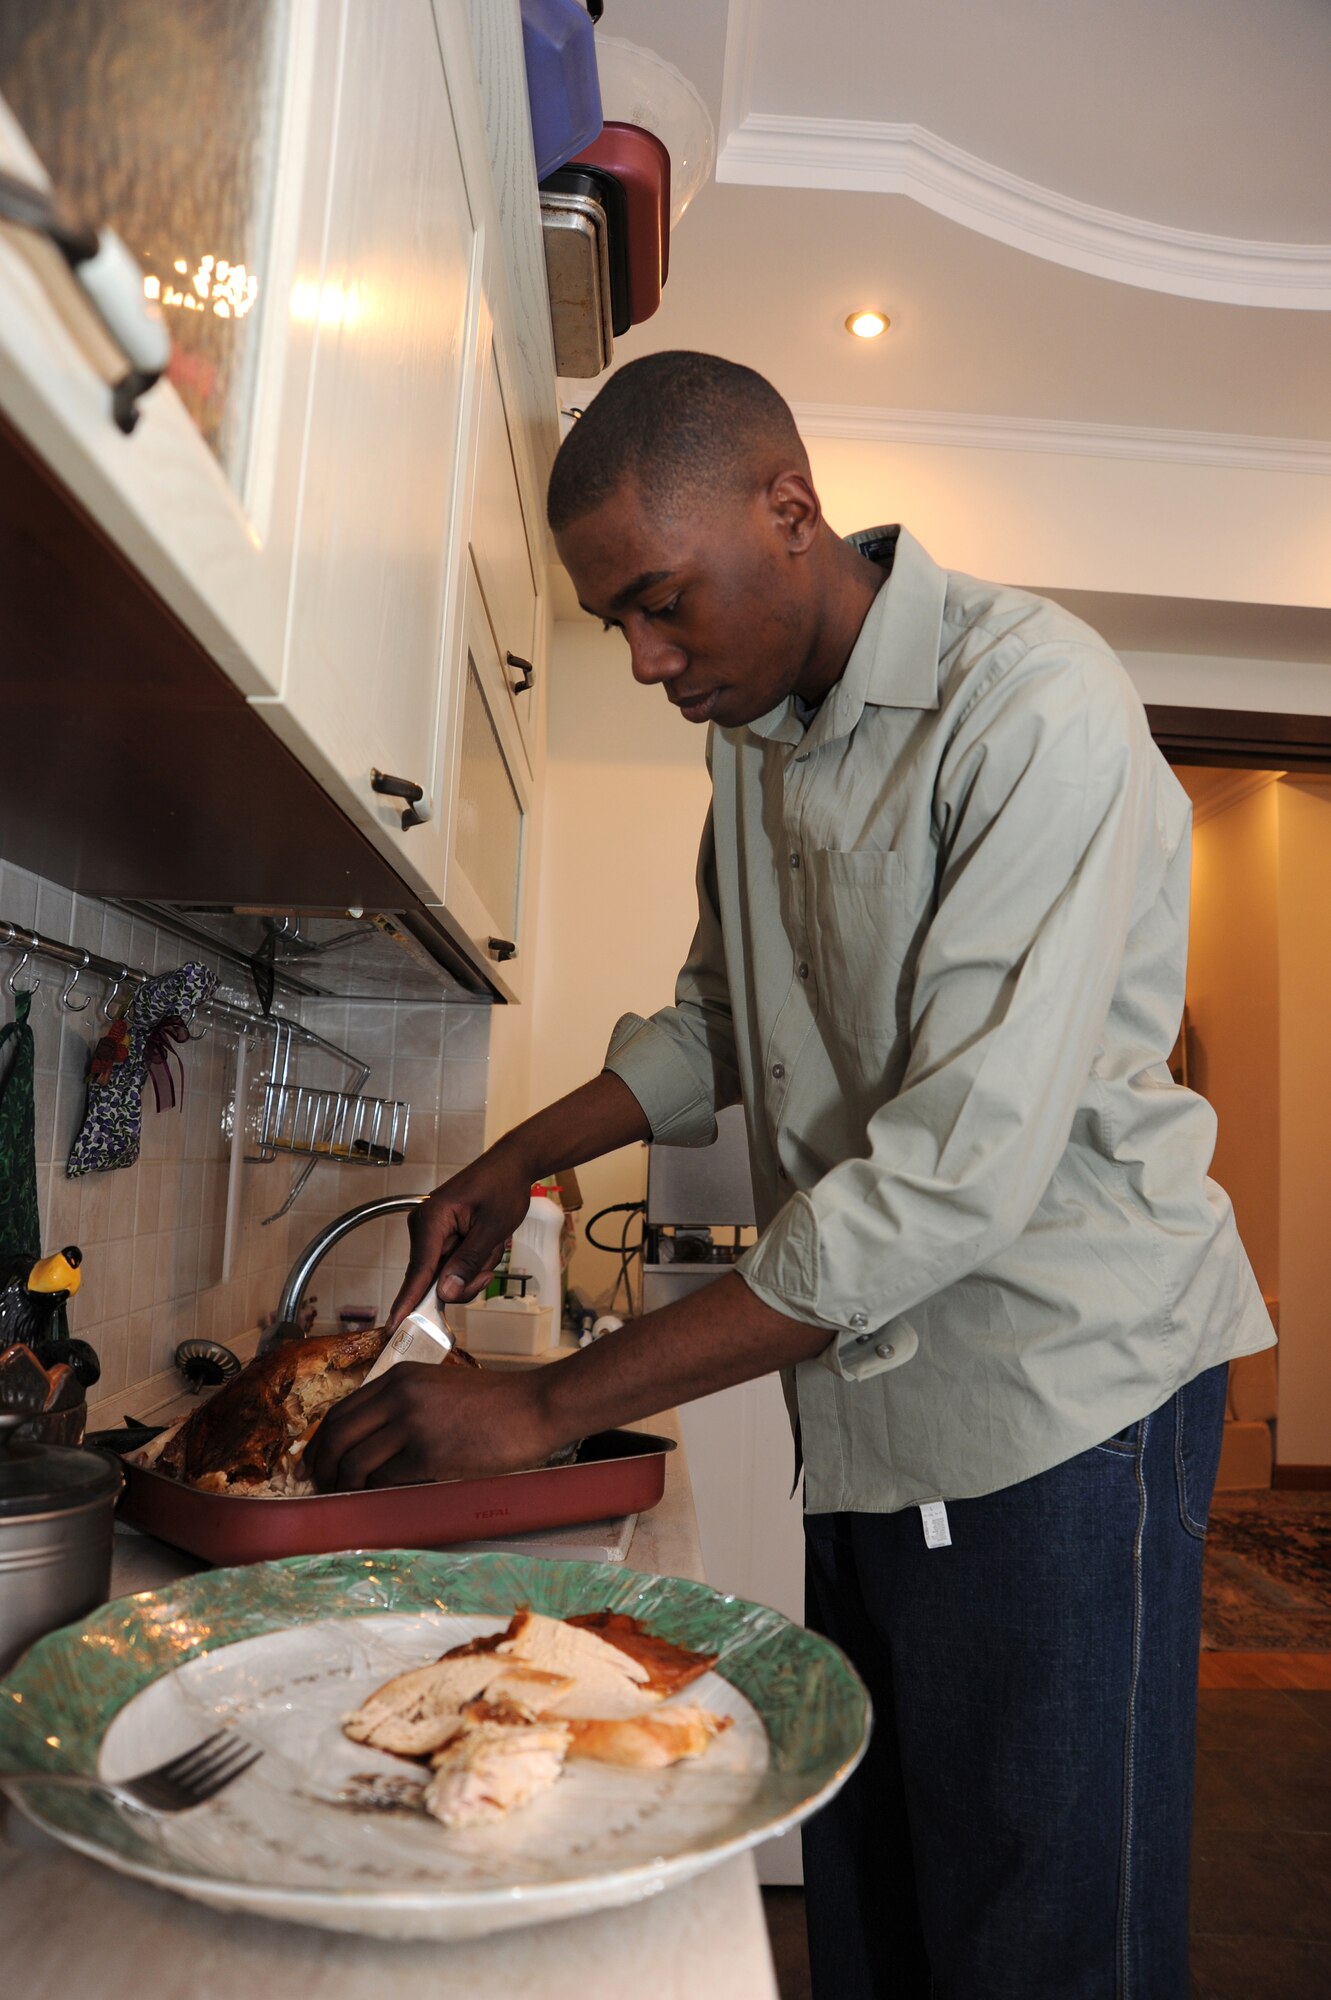 Airman 1st Class Saiquan Canty, 376th Expeditionary Logistics Readiness Squadron, carves a turkey at the home of Peggy and Travius Braun, U.S. Embassy partners in Kyrgyzstan, Dec. 24, 2011. Canty, deployed from Cannon Air Force Base, N.M., is one of seven service members from the Transit Center at Manas that was privileged to experience Christmas dinner with the Braun family who volunteered to host the service members.(U.S. Air Force photo/Staff Sgt. Angela Ruiz)